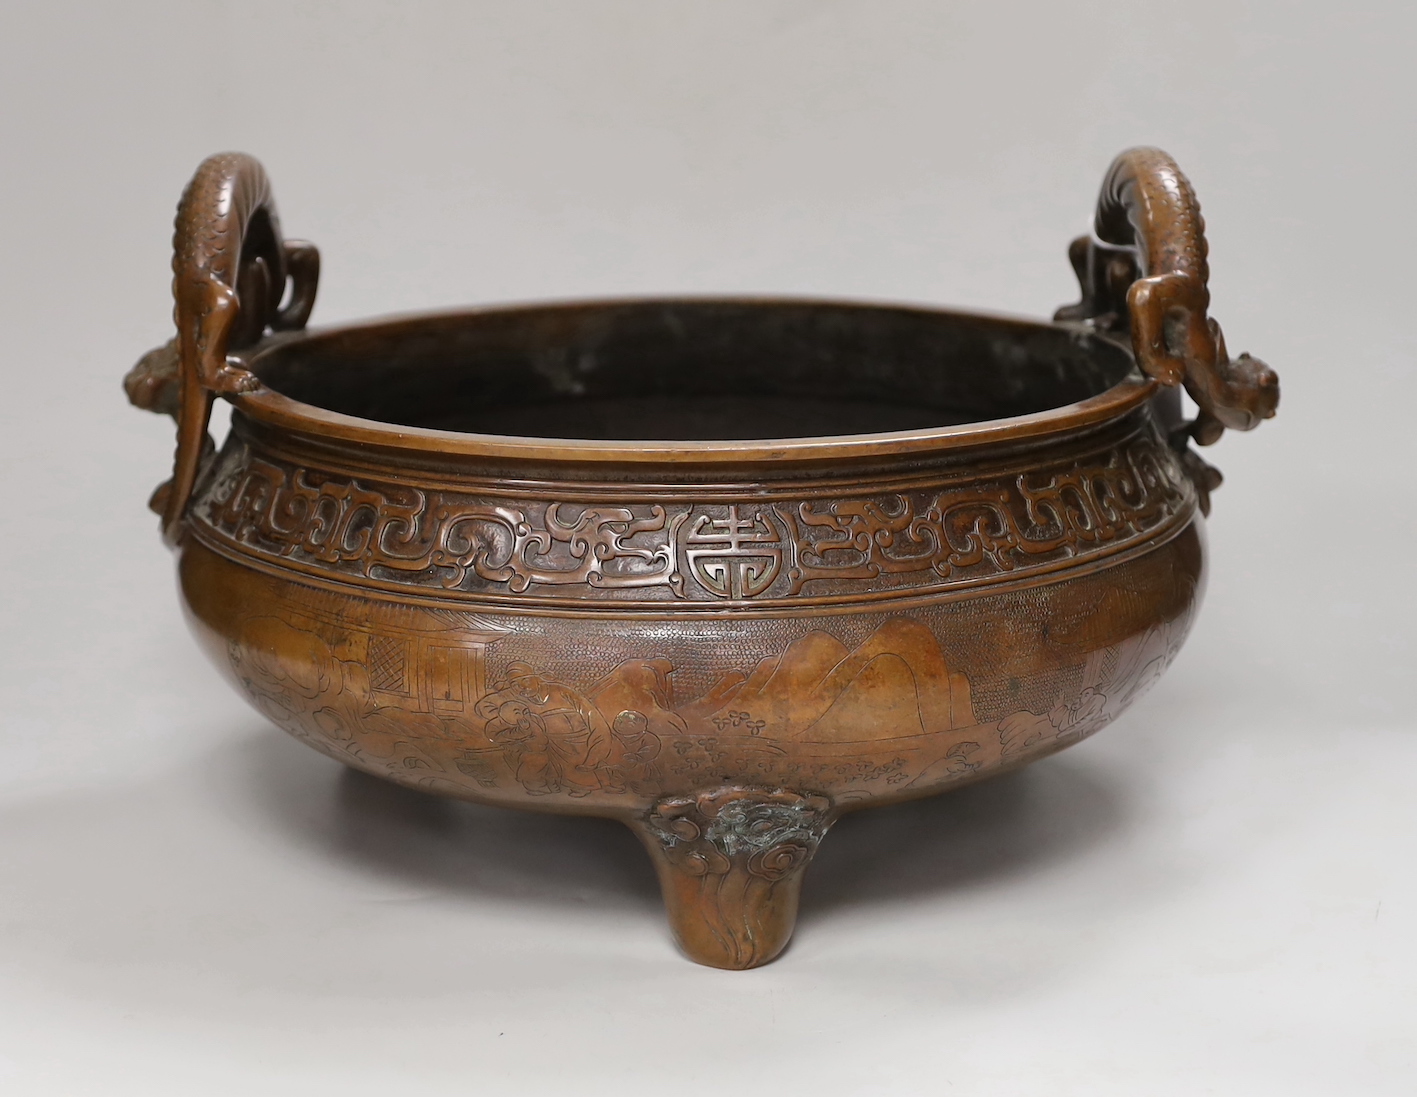 A massive Chinese brown patinated bronze ding censer, with dragon handles, 23.5cm including handles high